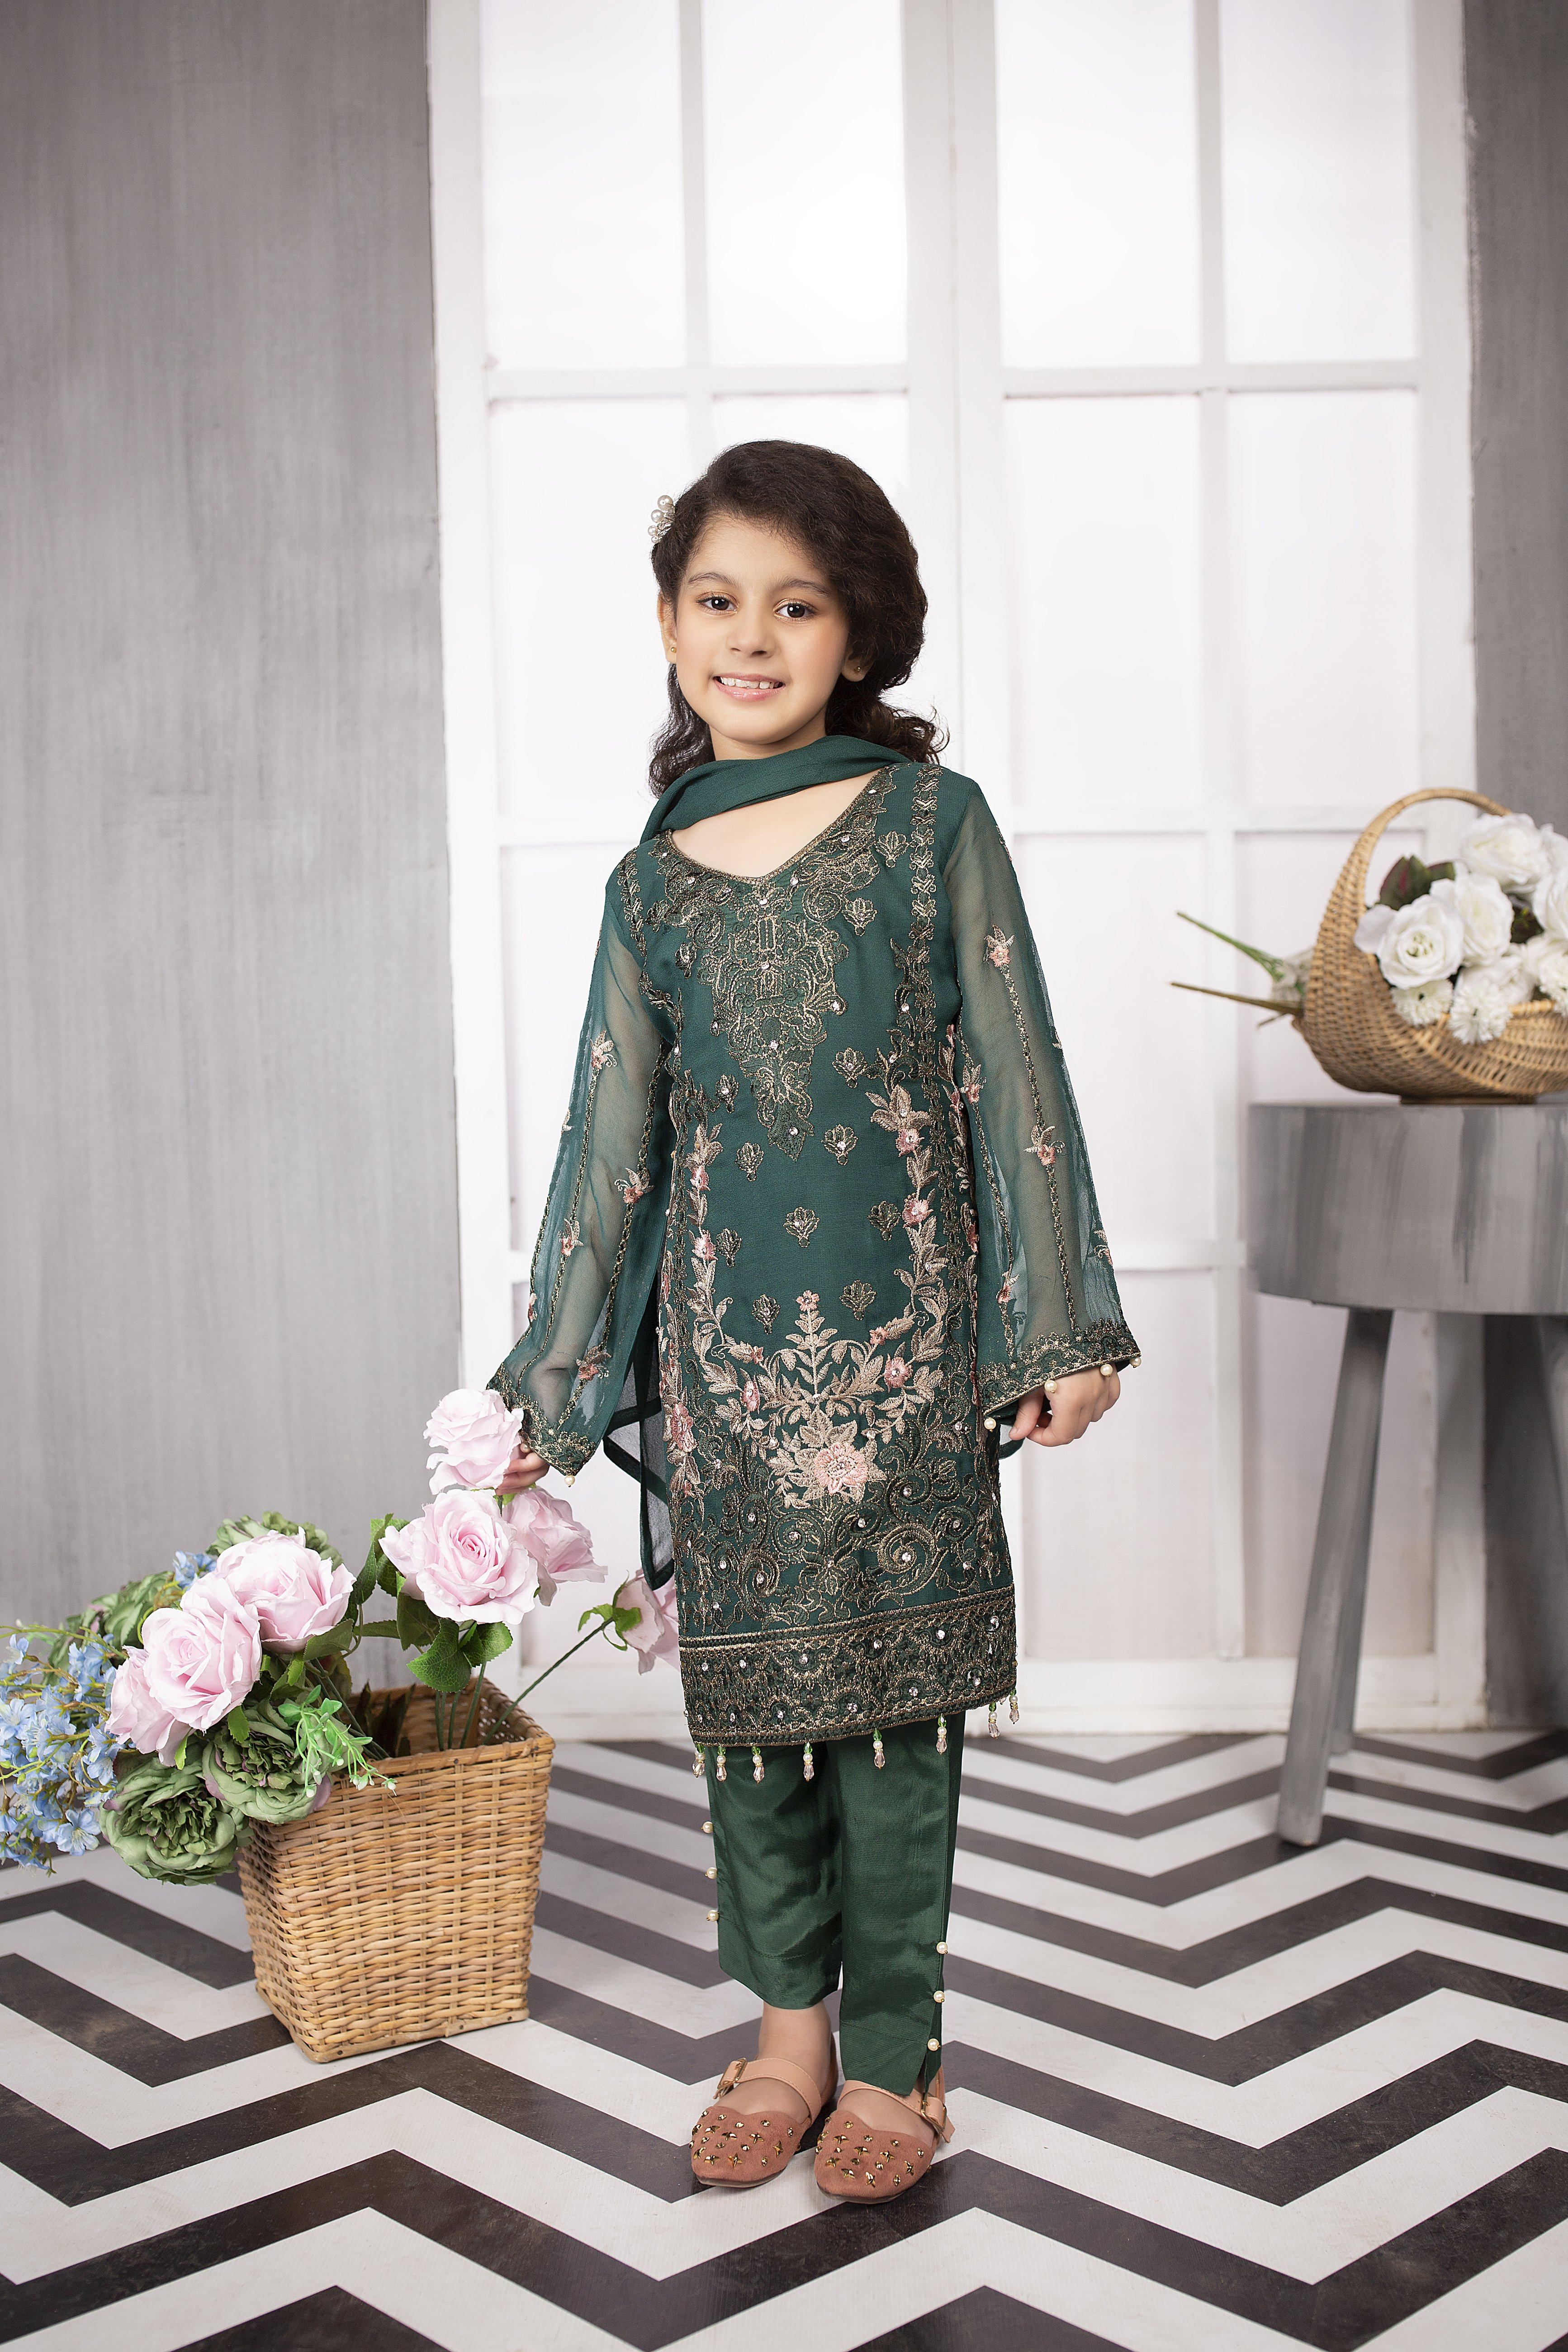 Simrans Kids Eid Edition Meena Kameez Outfit With Pearl Detailed Trousers Mother and Daughter - Desi Posh